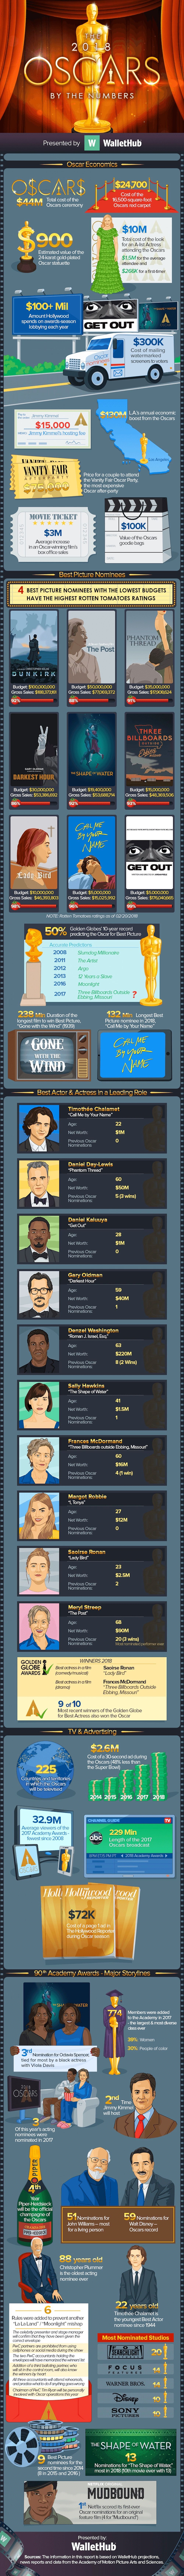 2018-oscars-by-the-numbers